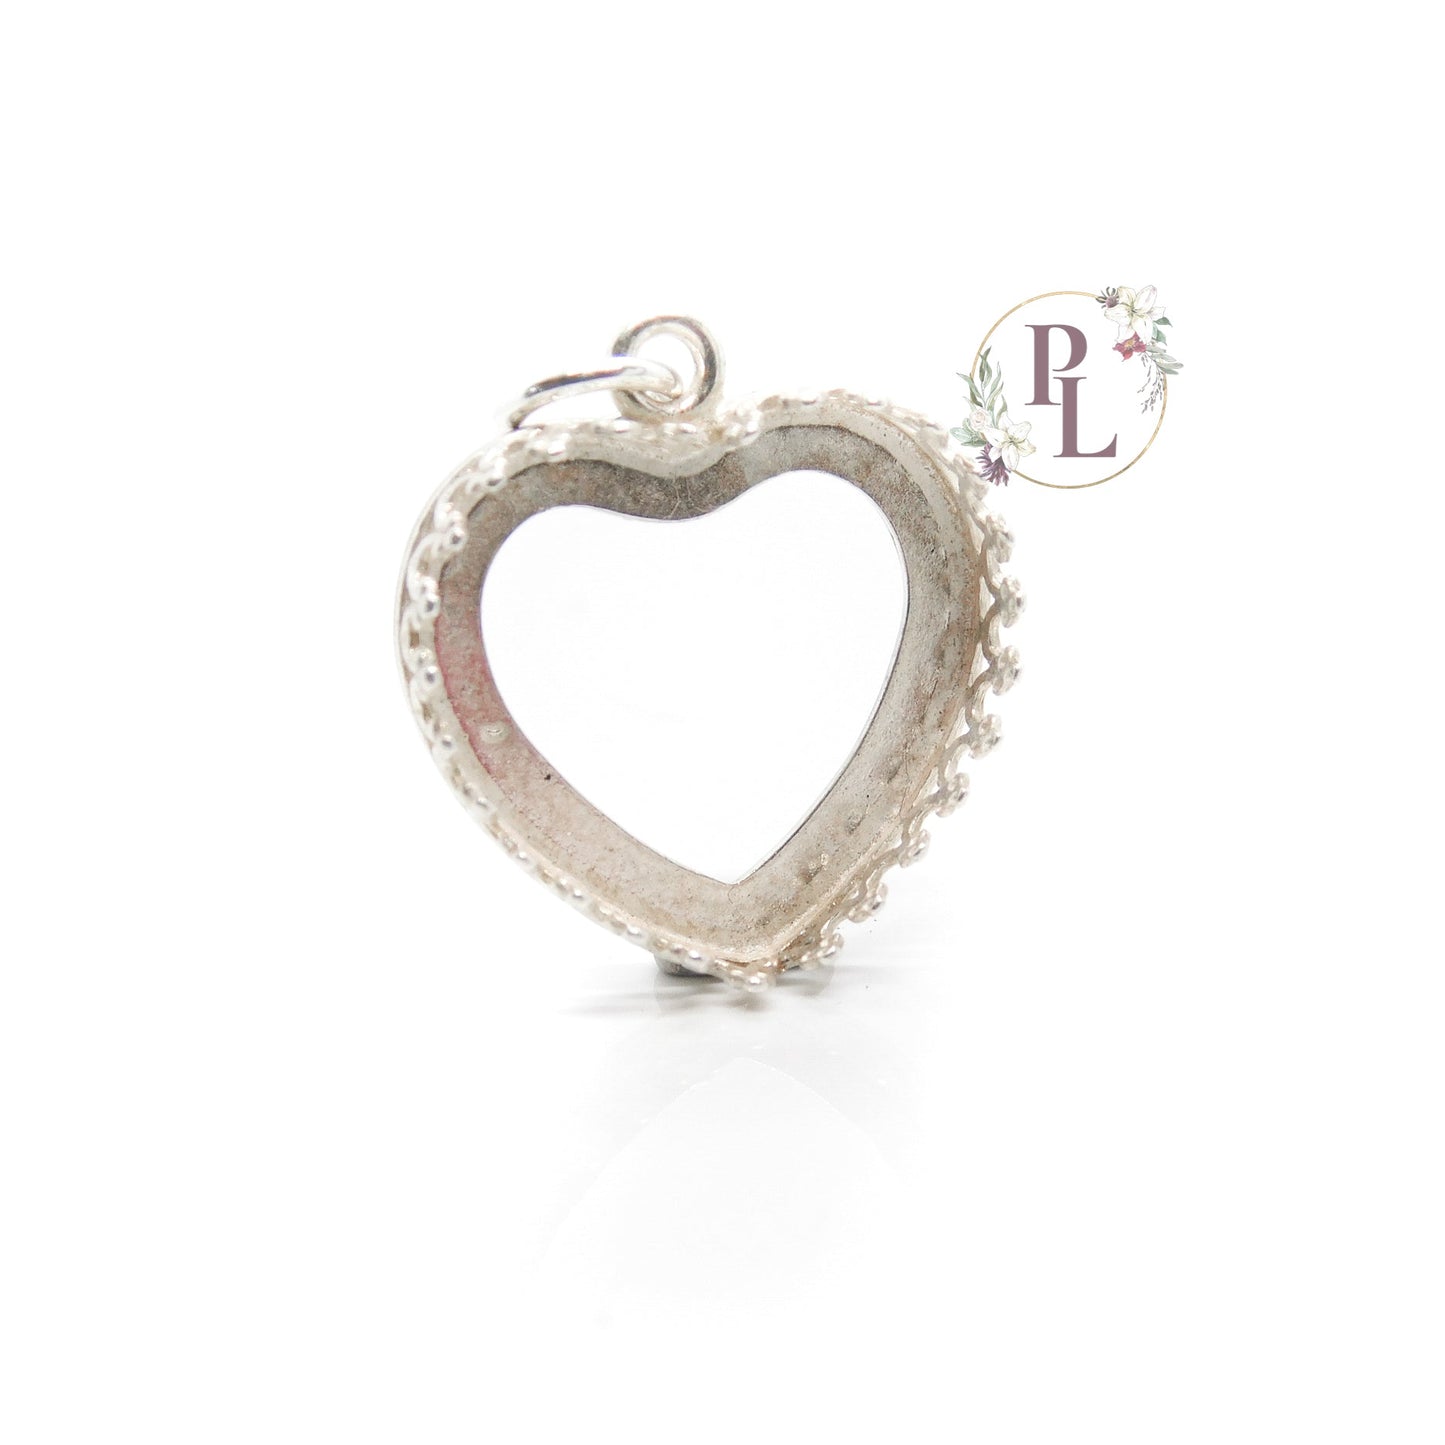 Adeline Crowned Heart Breastmilk Necklace by Pandora Lilly Keepsakes - A heart shaped 925 Sterling Silver setting with crowned edging